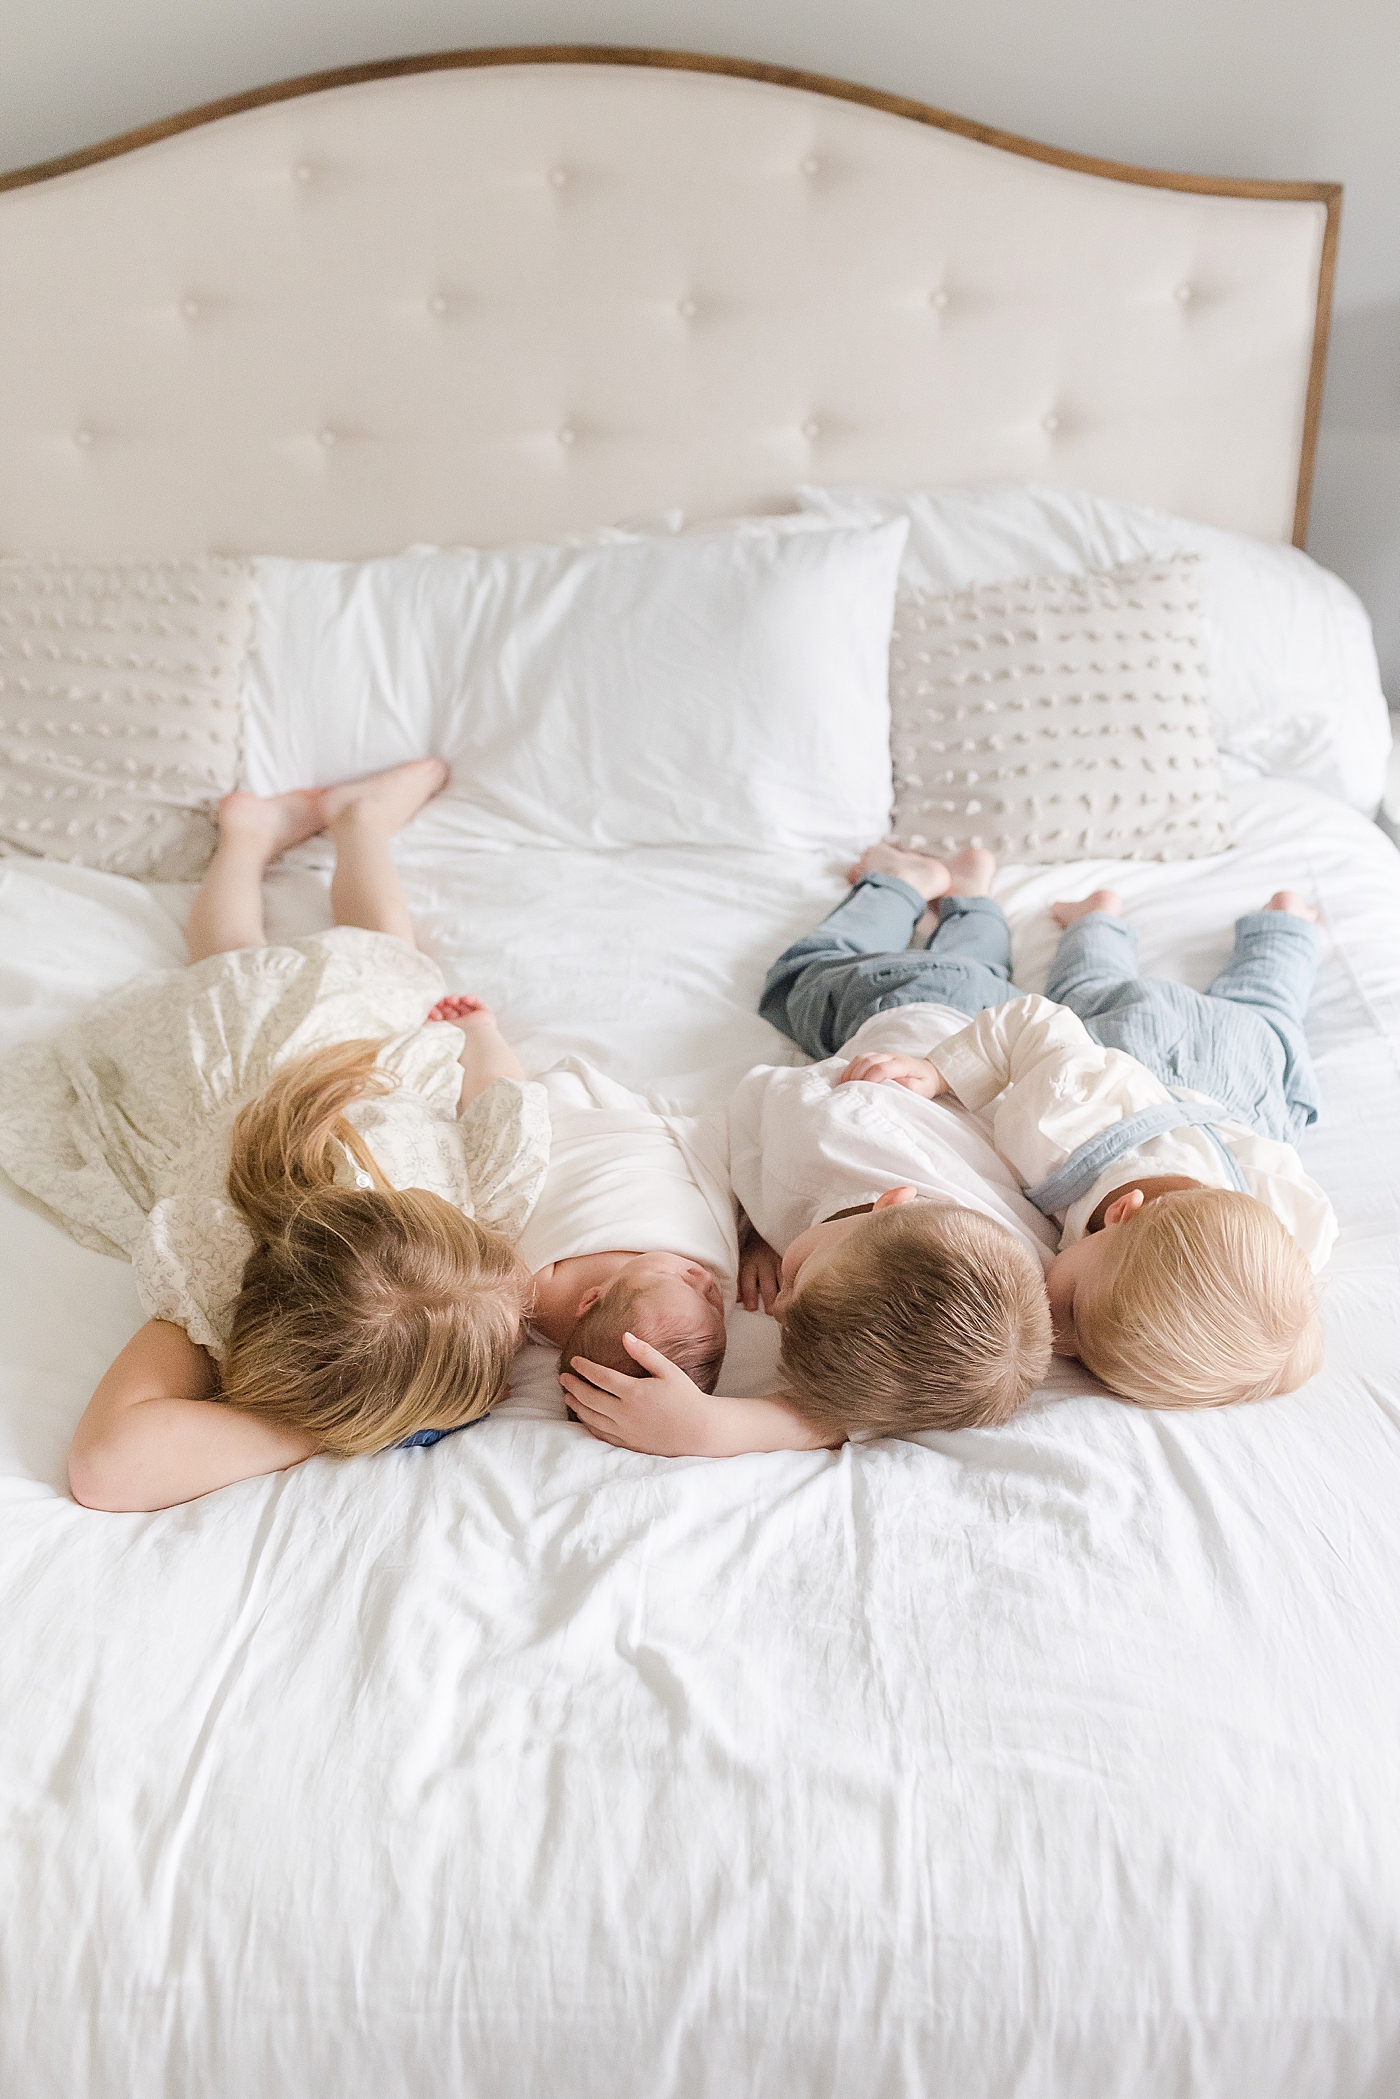 Siblings laying on a bed with their new baby | Image by Emily Gerald Photography